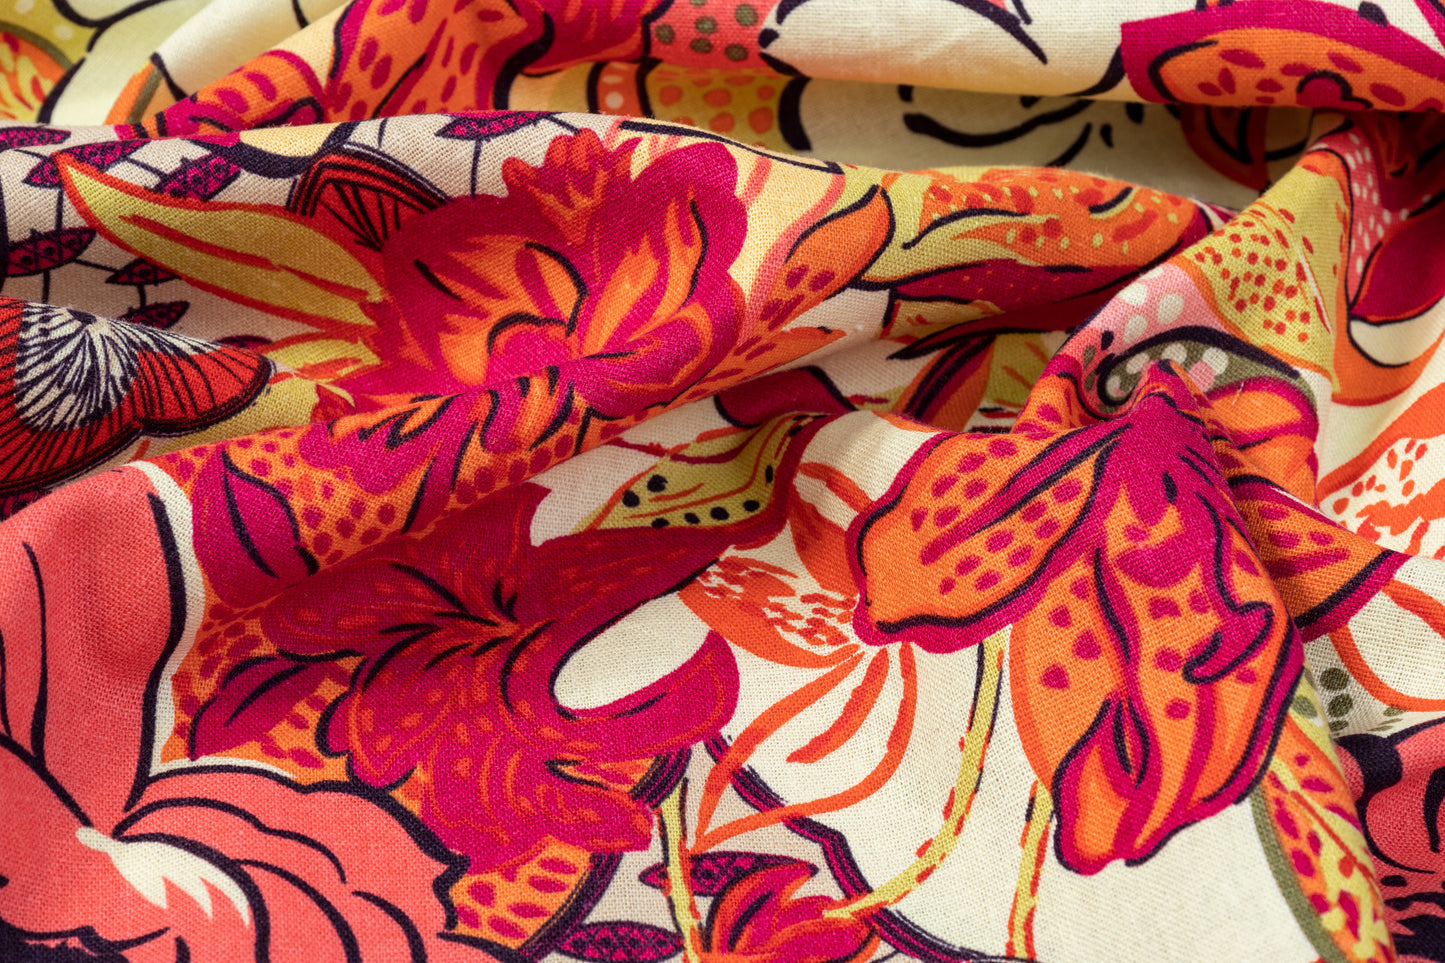 Floral Cotton and Linen Blend - Red, Orange, Yellow